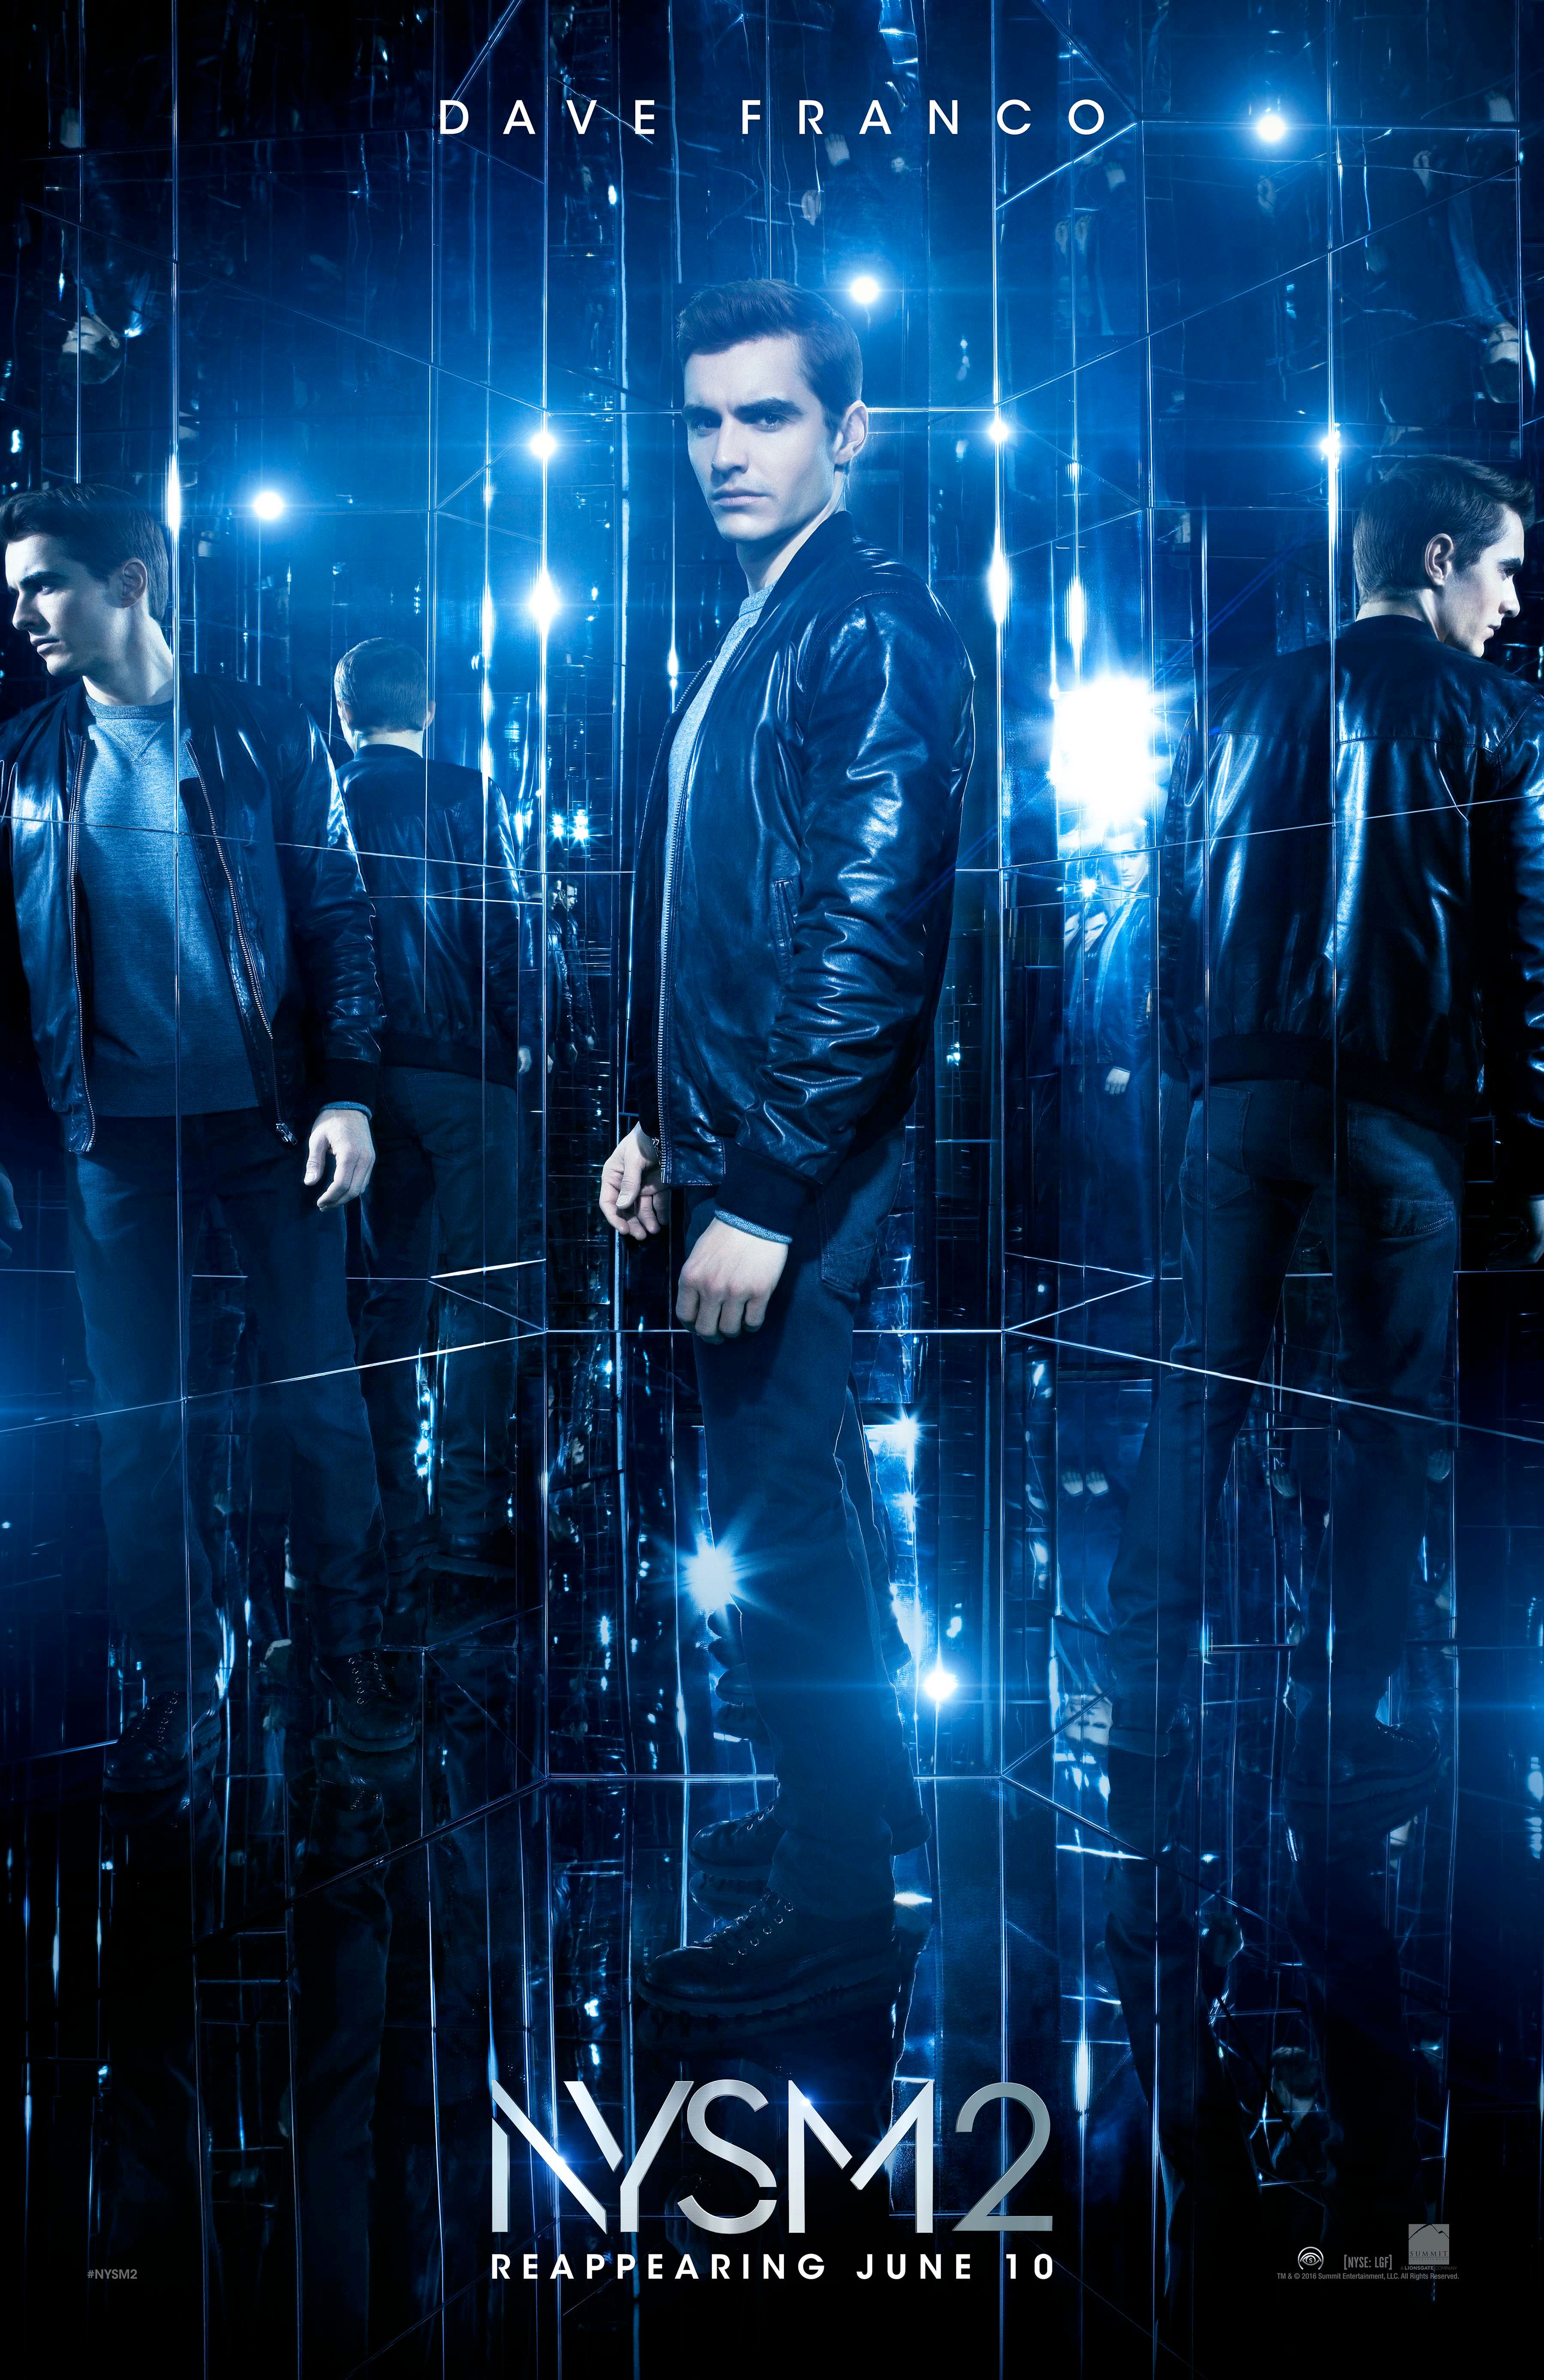 Now You See Me 2: New Trailer Puts the Magicians on the Run